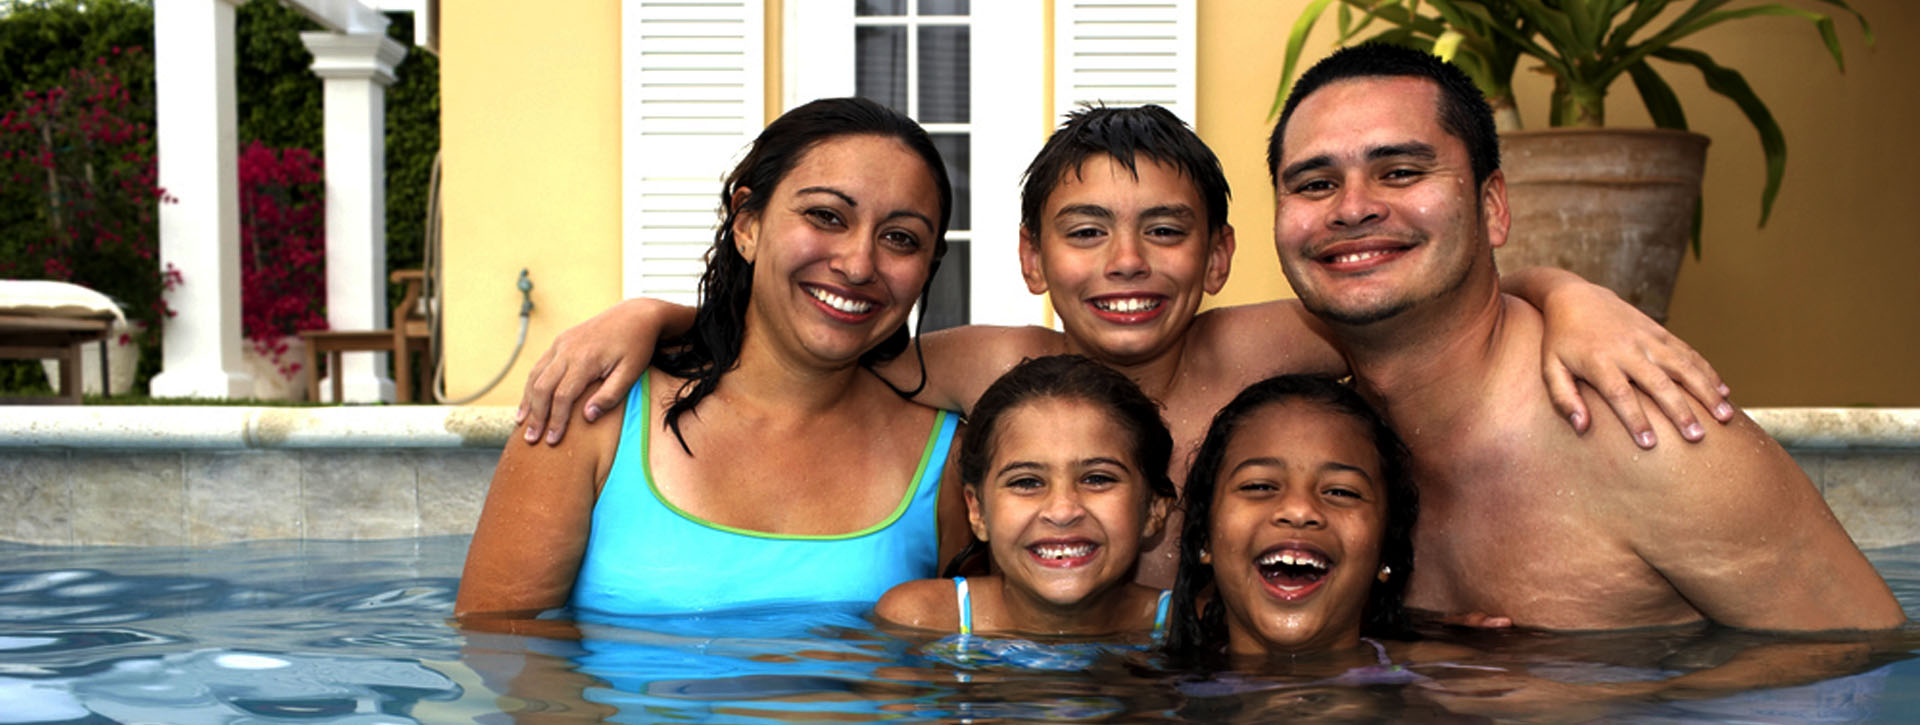 happy family in swimming pool